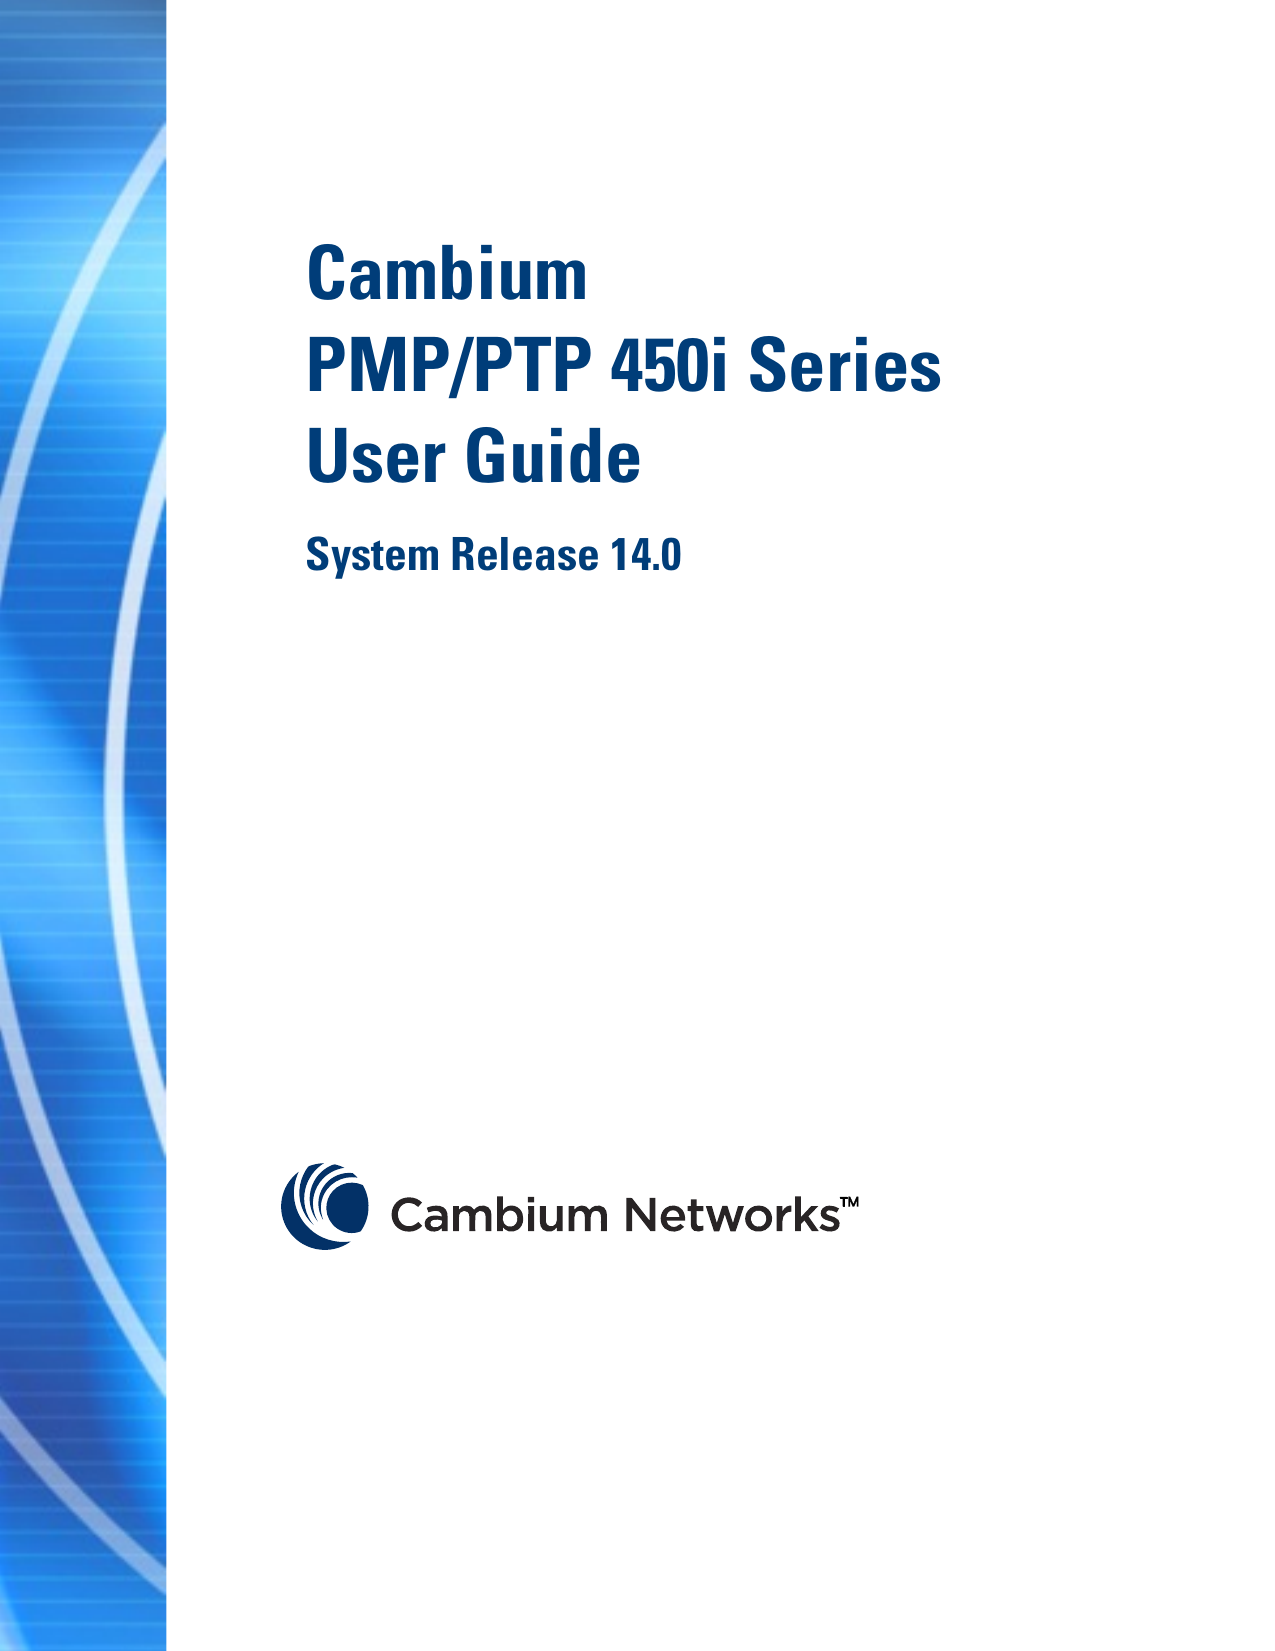  F  Cambium  PMP/PTP 450i Series  User Guide System Release 14.0                  pass  